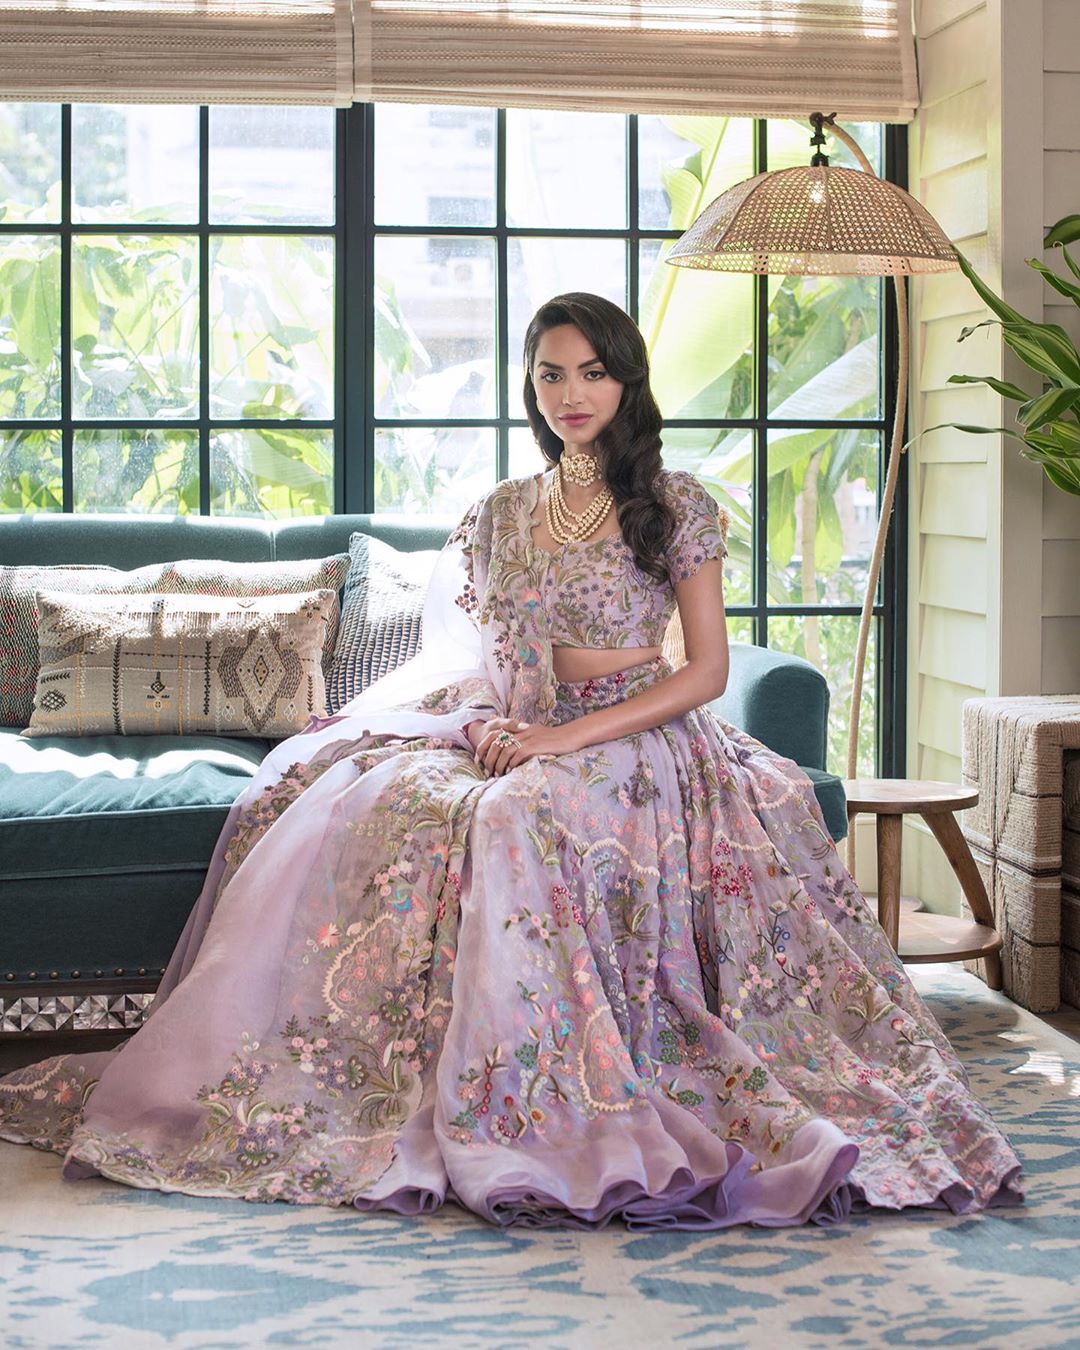 50+ Bridal Lehenga Trends For 2019 That Brides Can Totally Rely On!